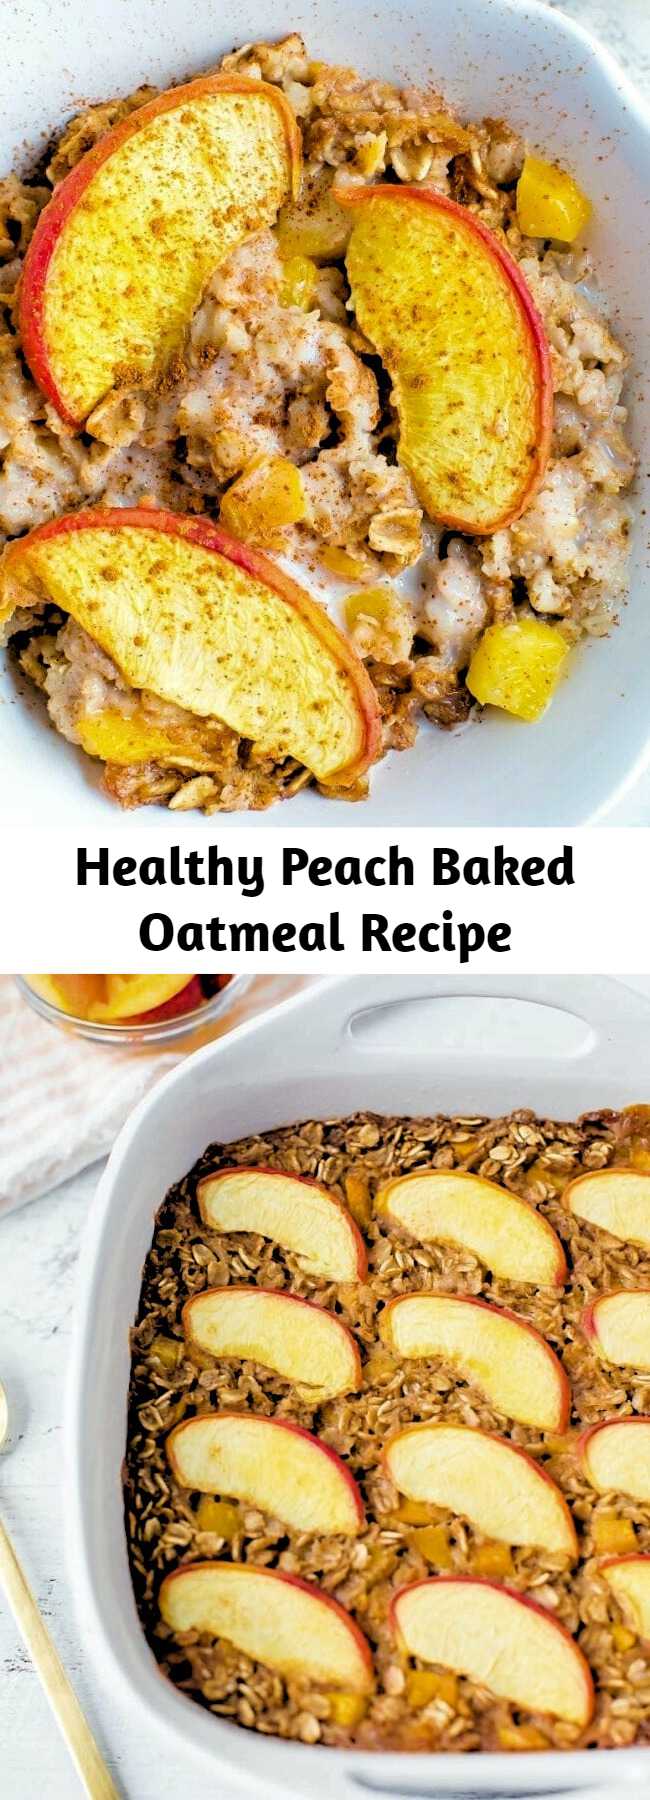 A healthy baked oatmeal recipe using one of my favorite summer fruits: peaches! Make ahead for meal prep or a weekend brunch. #peachoatmeal #bakedoatmeal #peachbakedoatmeal